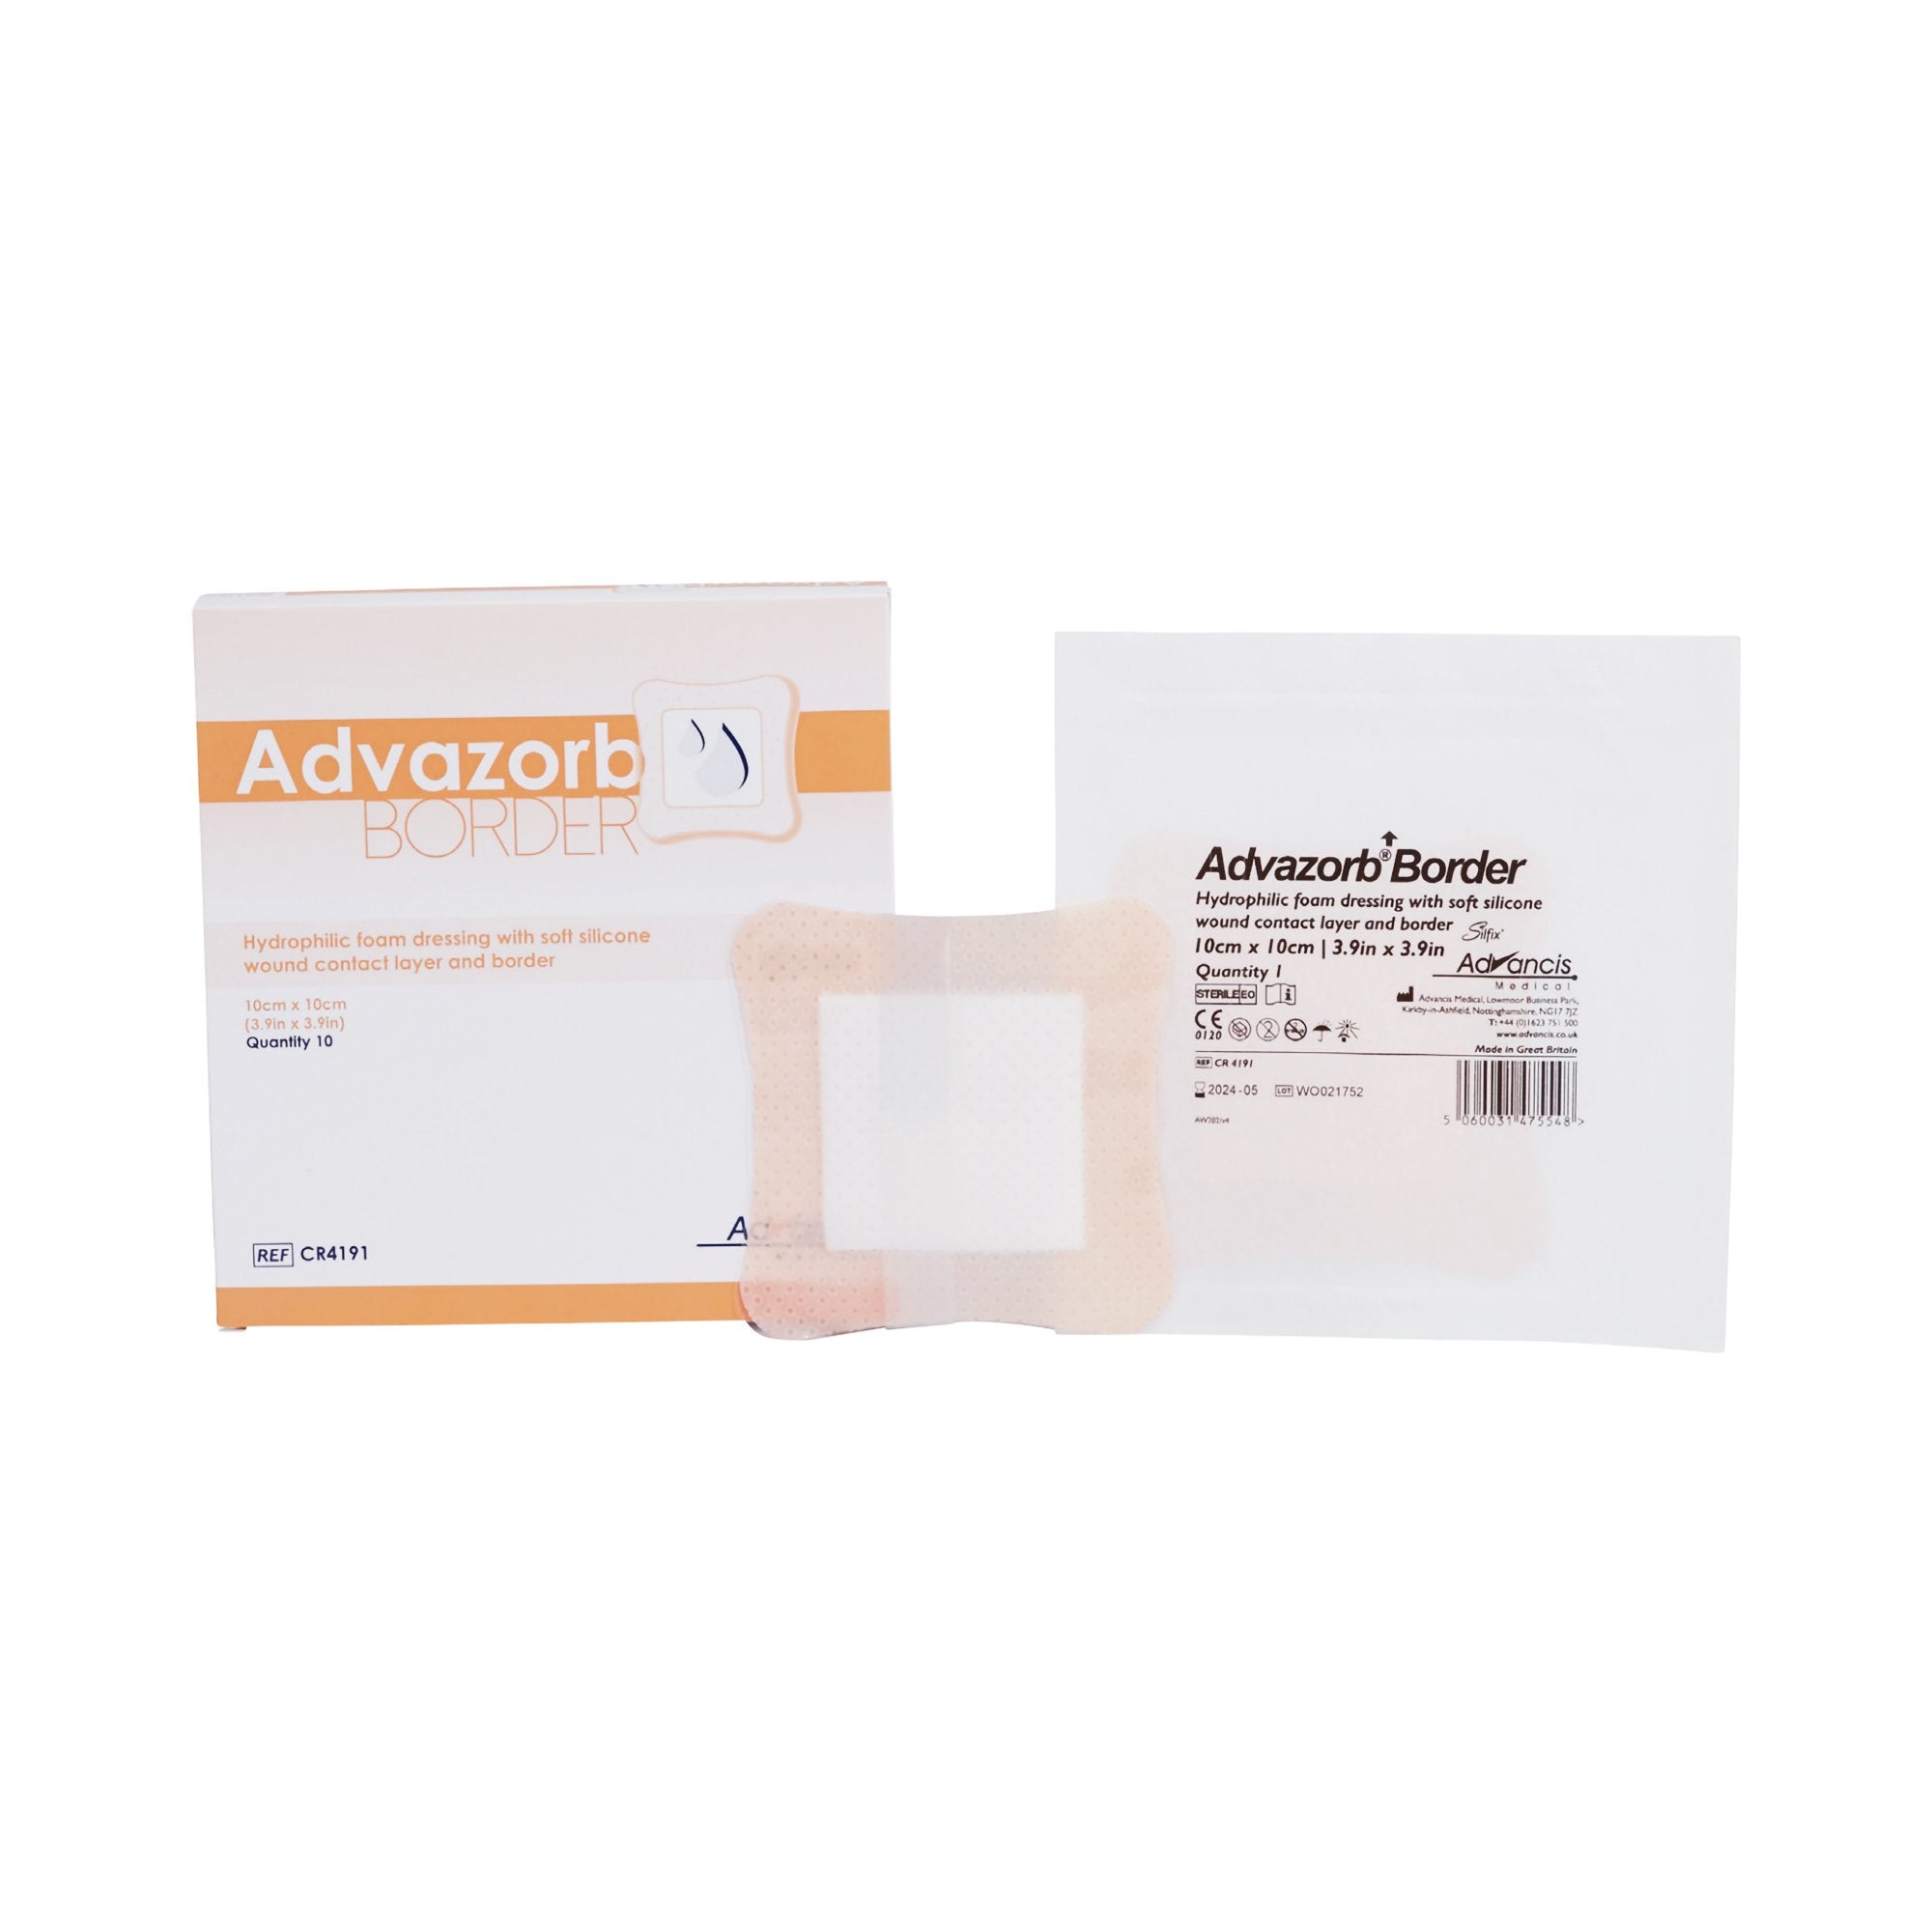 Foam Dressing Advazorb Border® 4 X 4 Inch With Border Waterproof Backing Silicone Face and Border Square Sterile